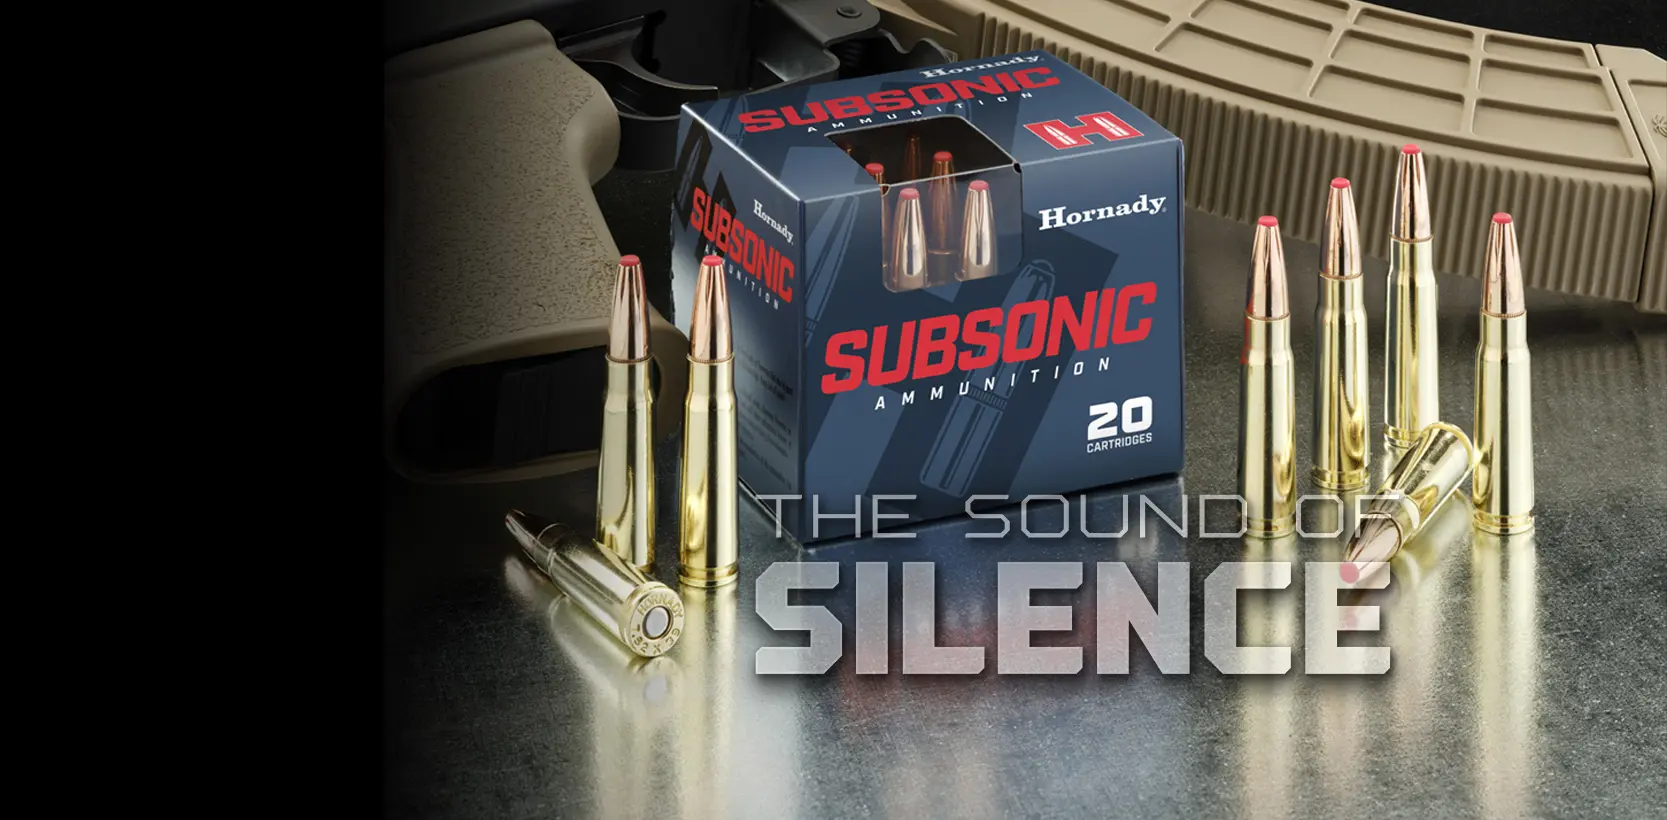 Slide number 5 ACCURACYANDPERFORMANCEBELOW THESPEED OF SOUNDHornady has added the 7.62 x 39 load to its Subsonic product line. Optimized for performance at subsonic velocities, this reliable expanding ammunition is not only fun to shoot, it delivers excellent terminal performance without a big bang.Find Out More